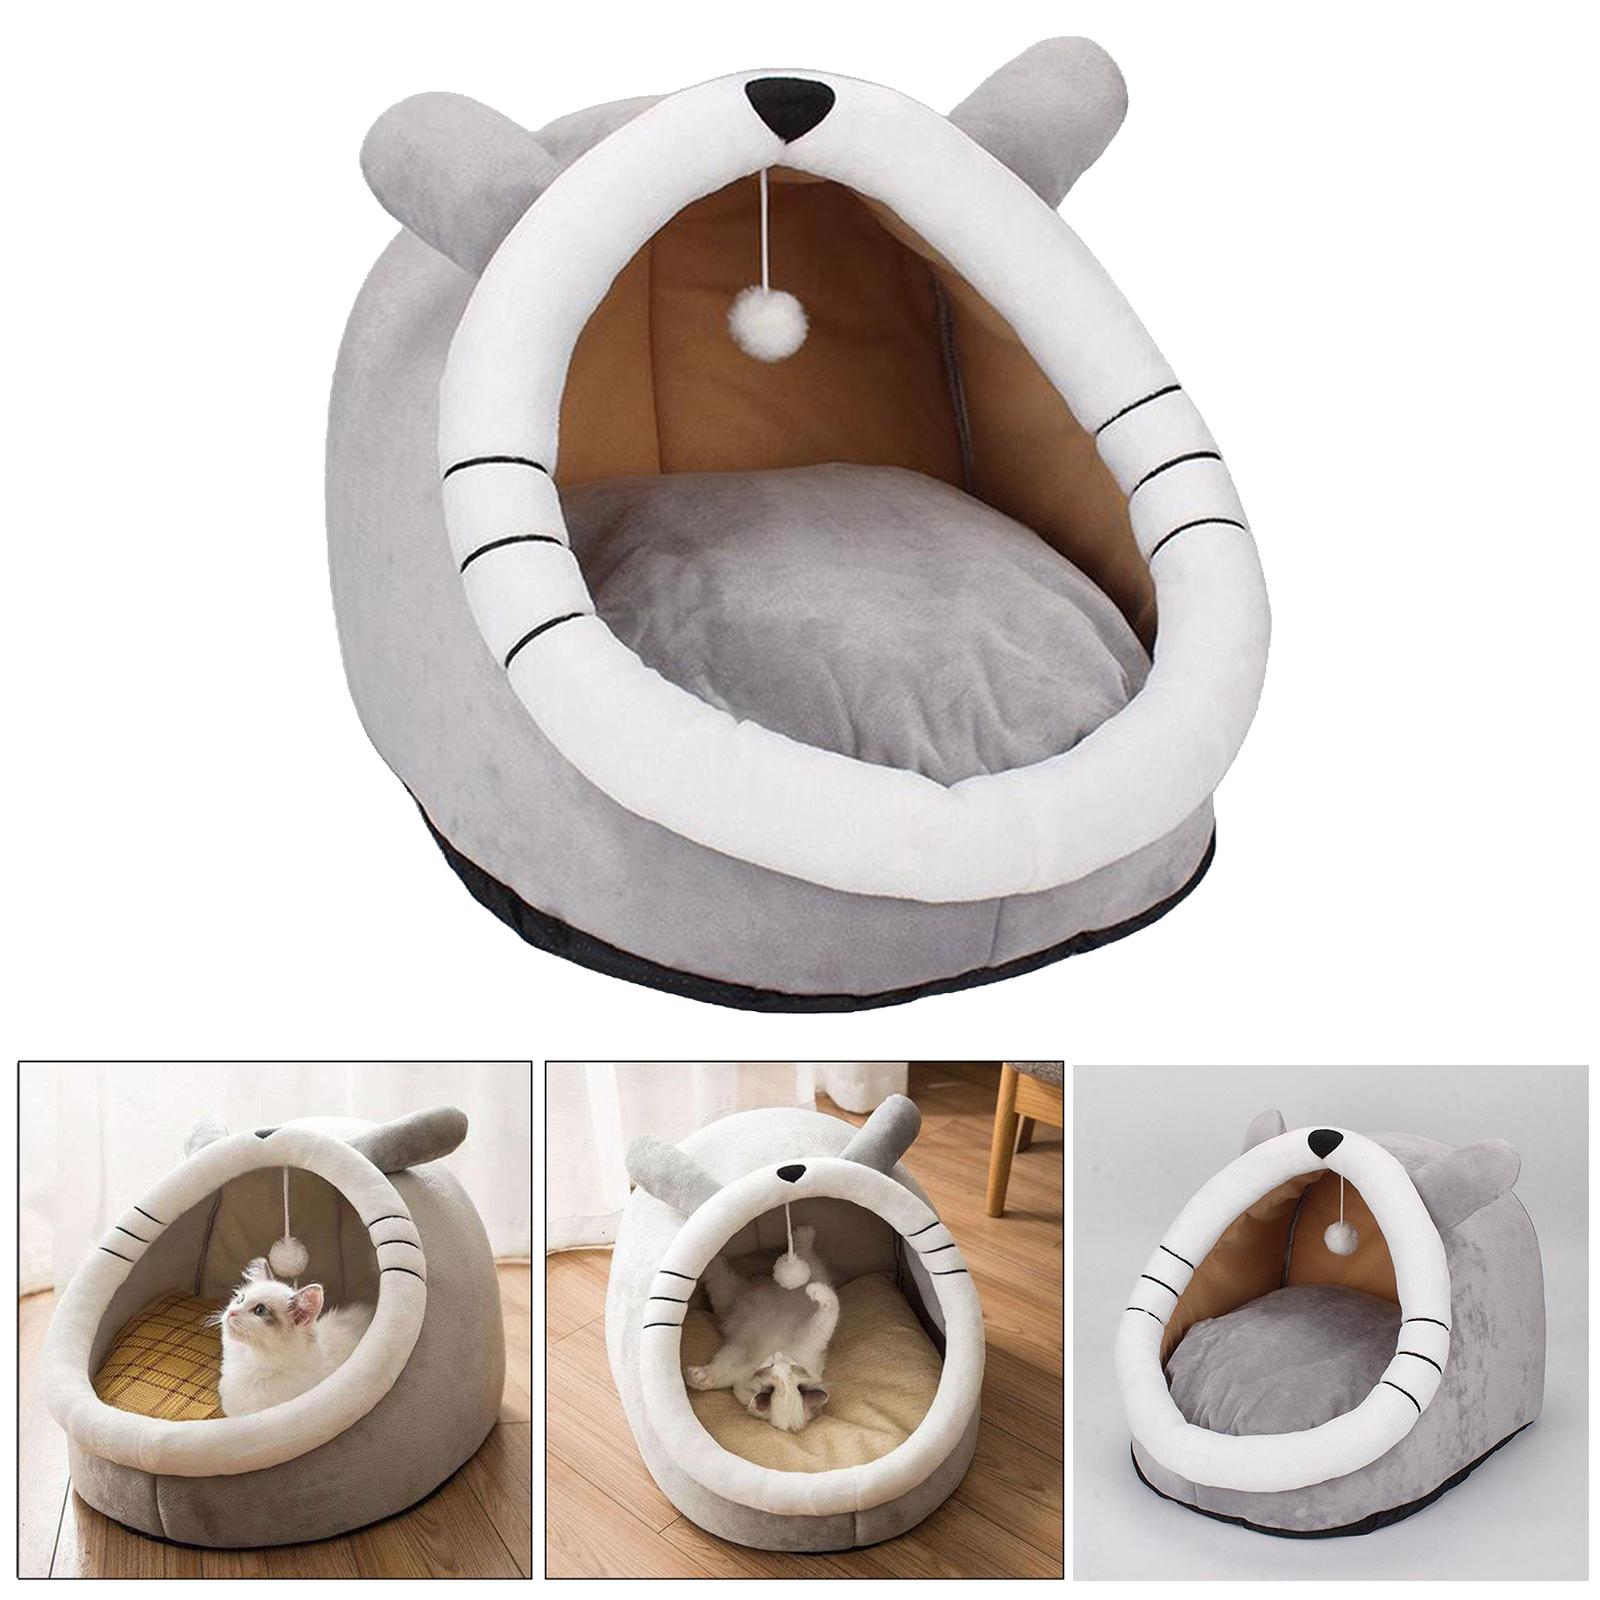 Dog Bed for Puppy Cats Soft House Soft Warm Pet Beds for Small Dogs Gray-L